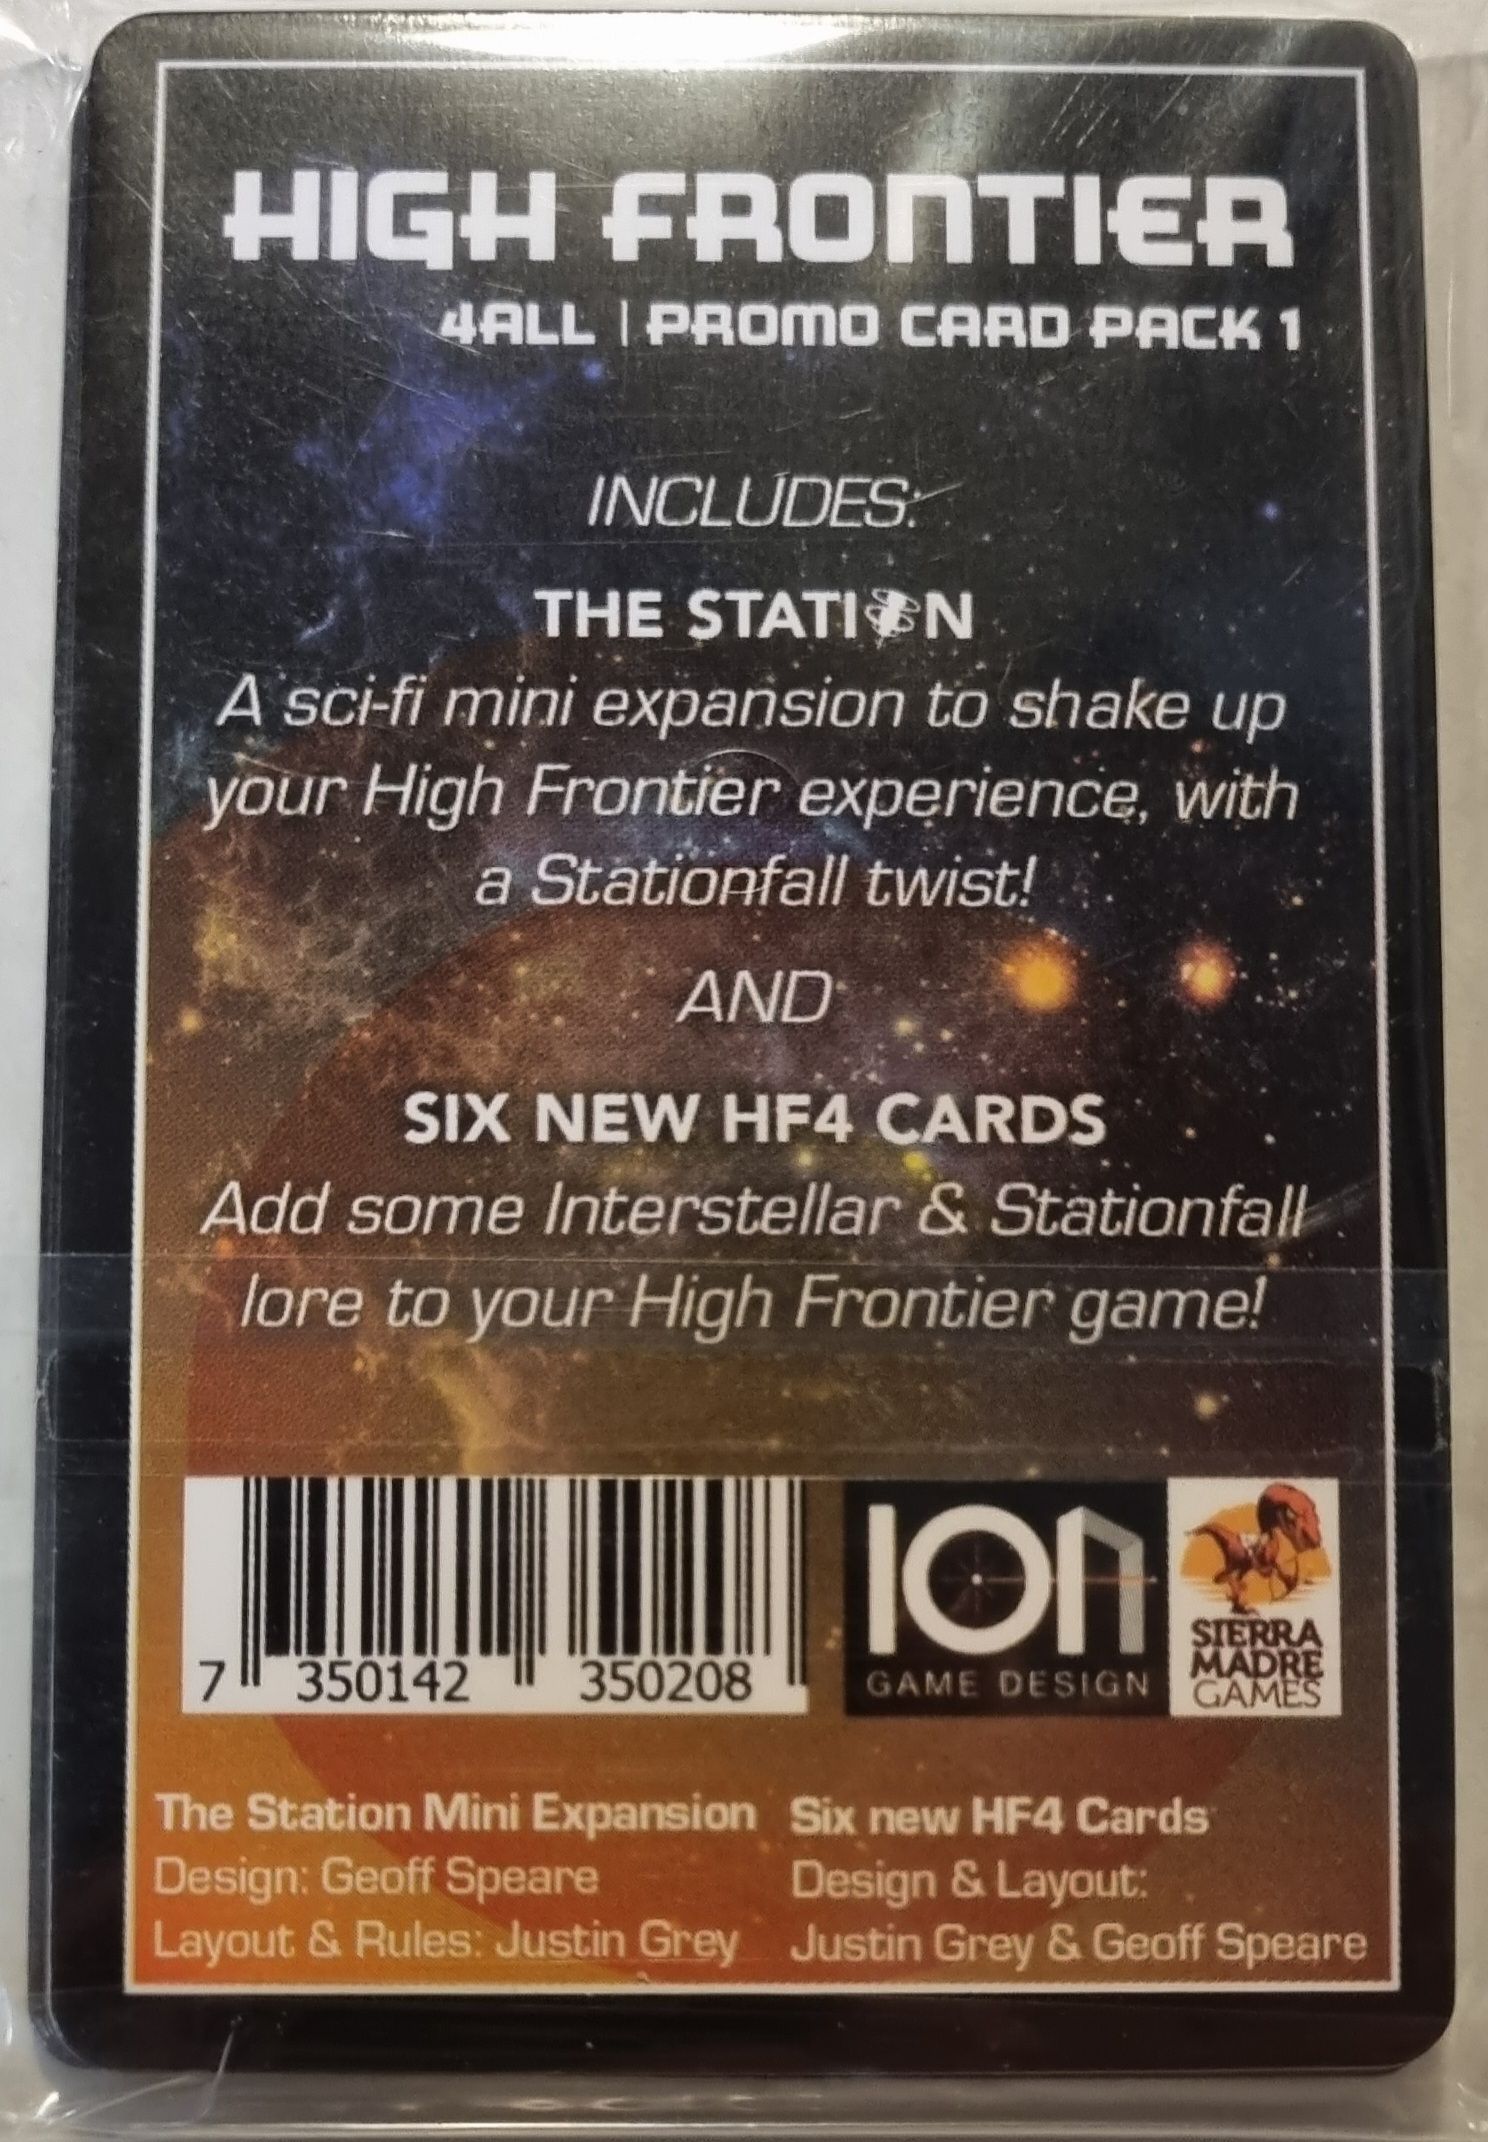 High Frontier: Promo Pack 1 – The Station Pack